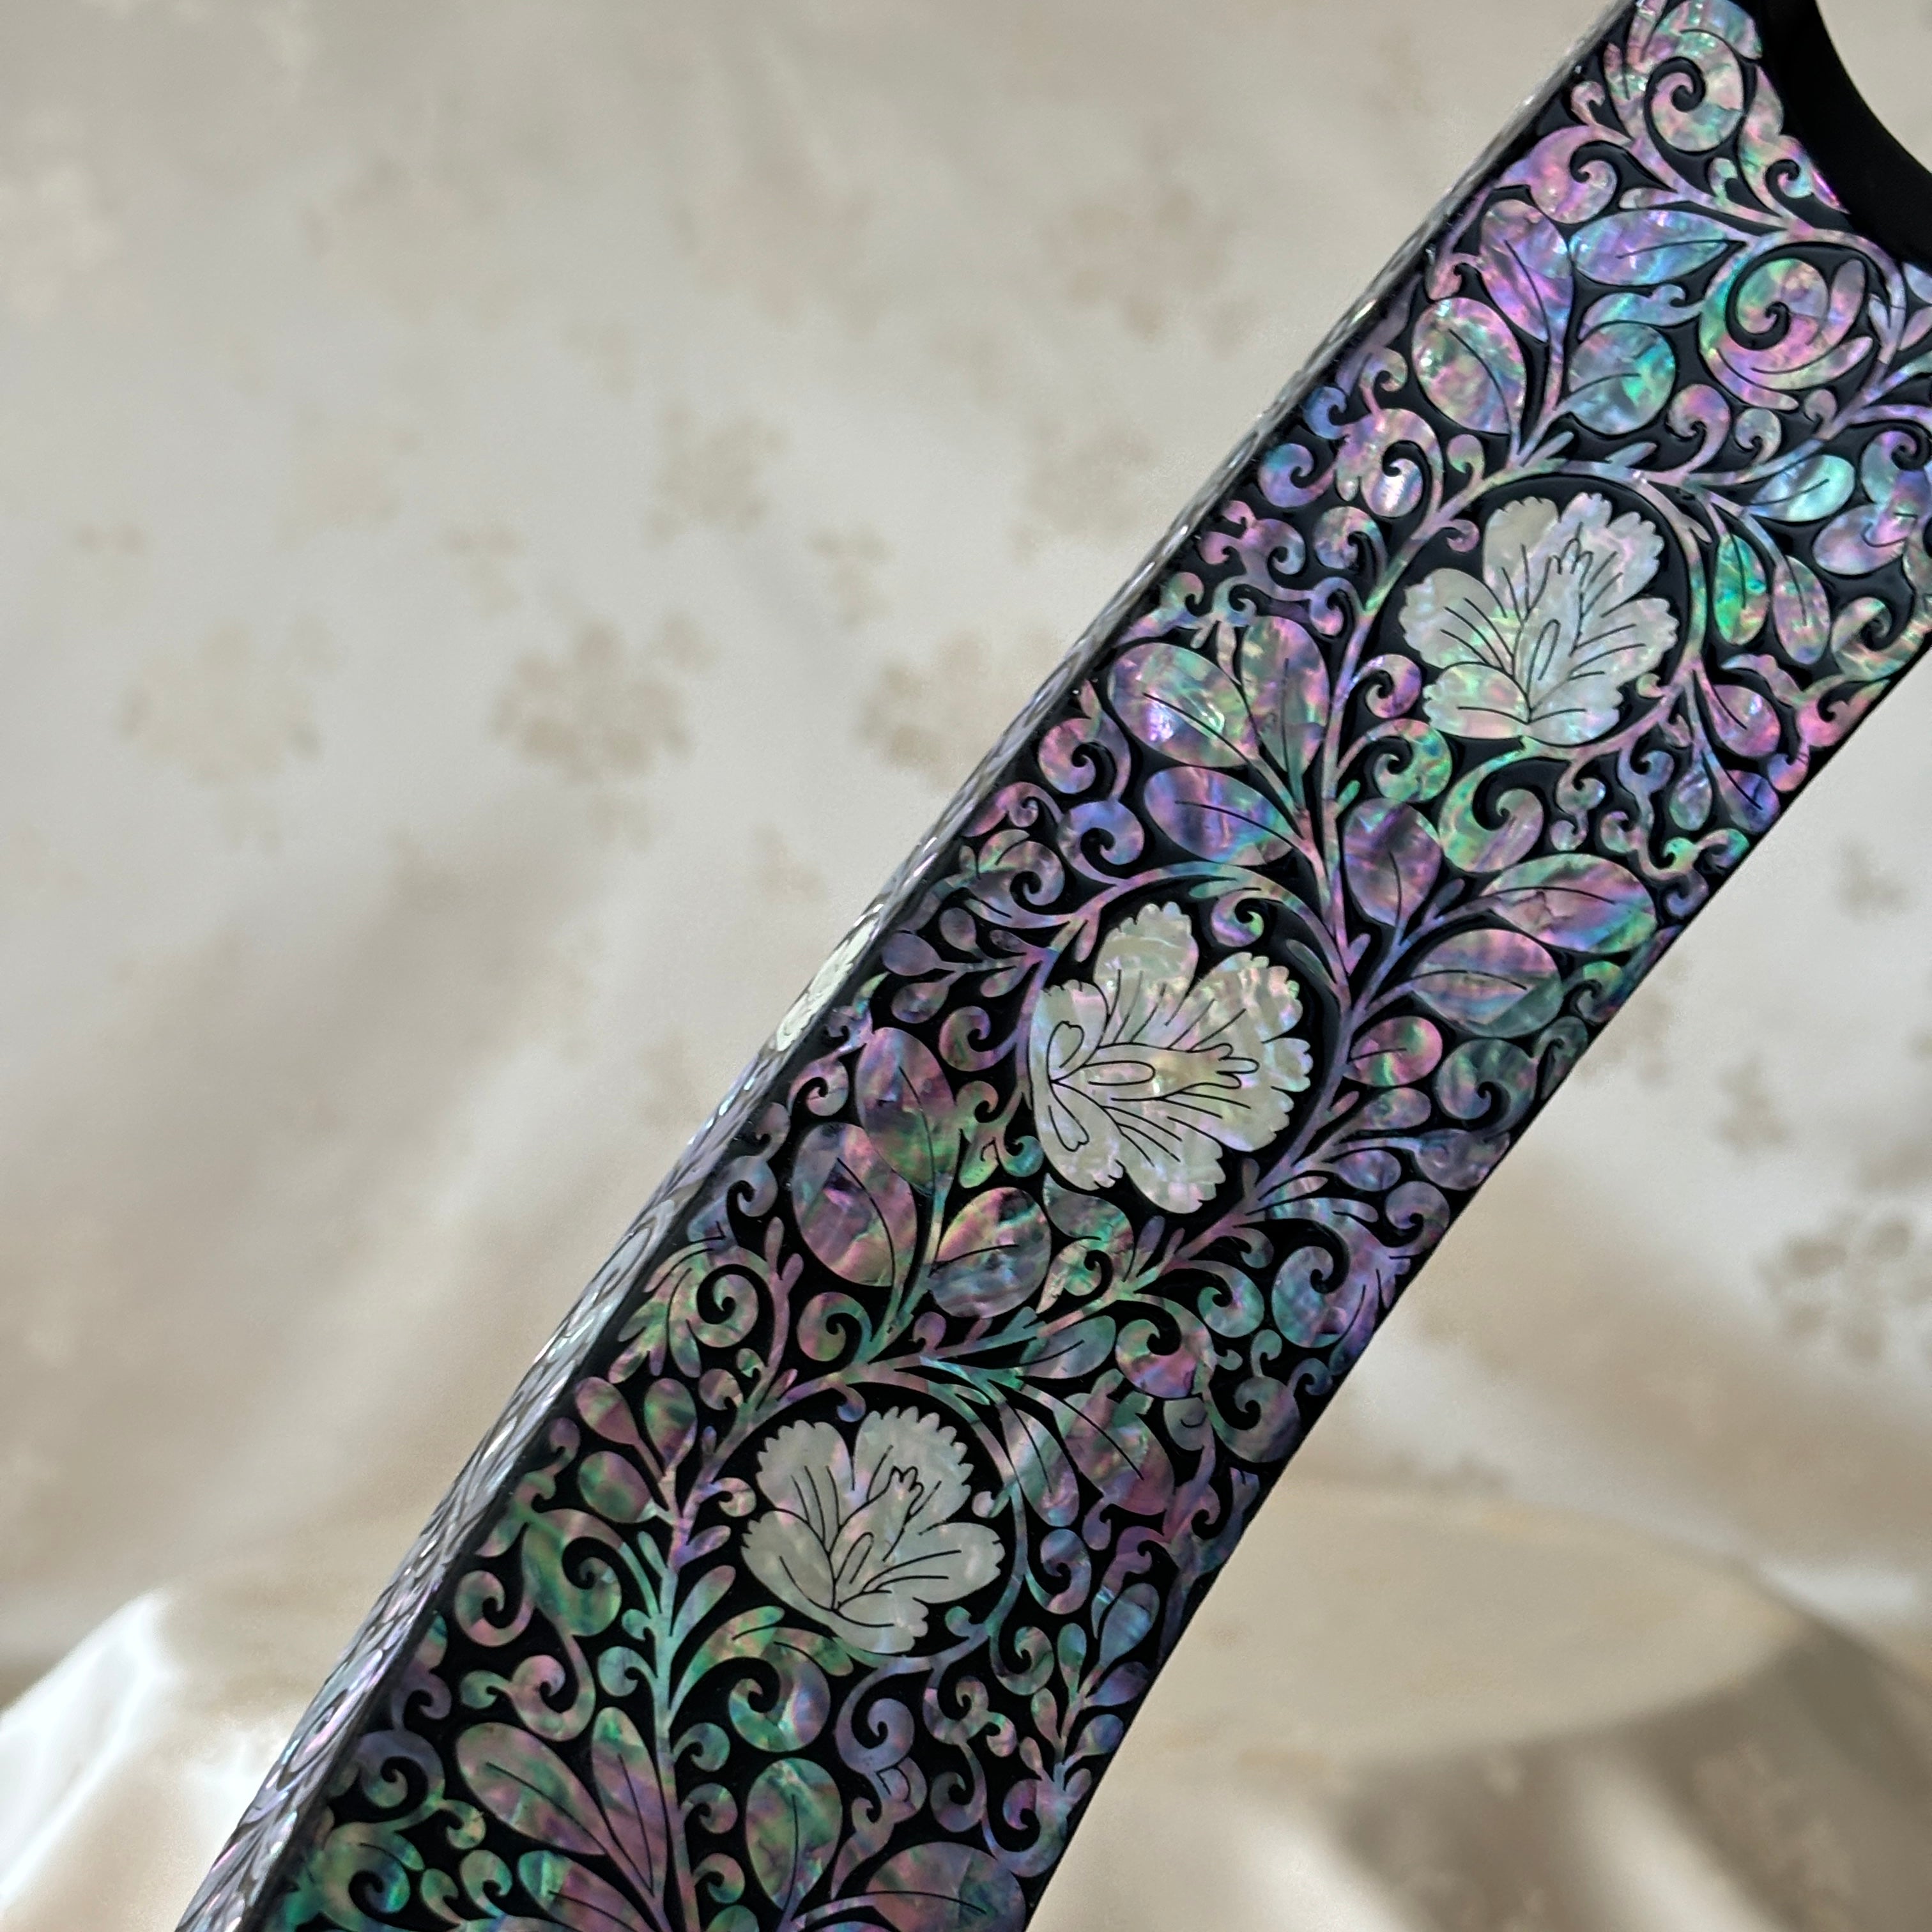 Close-up of the plum blossom pattern on the handmade Korean mother of pearl wine holder.